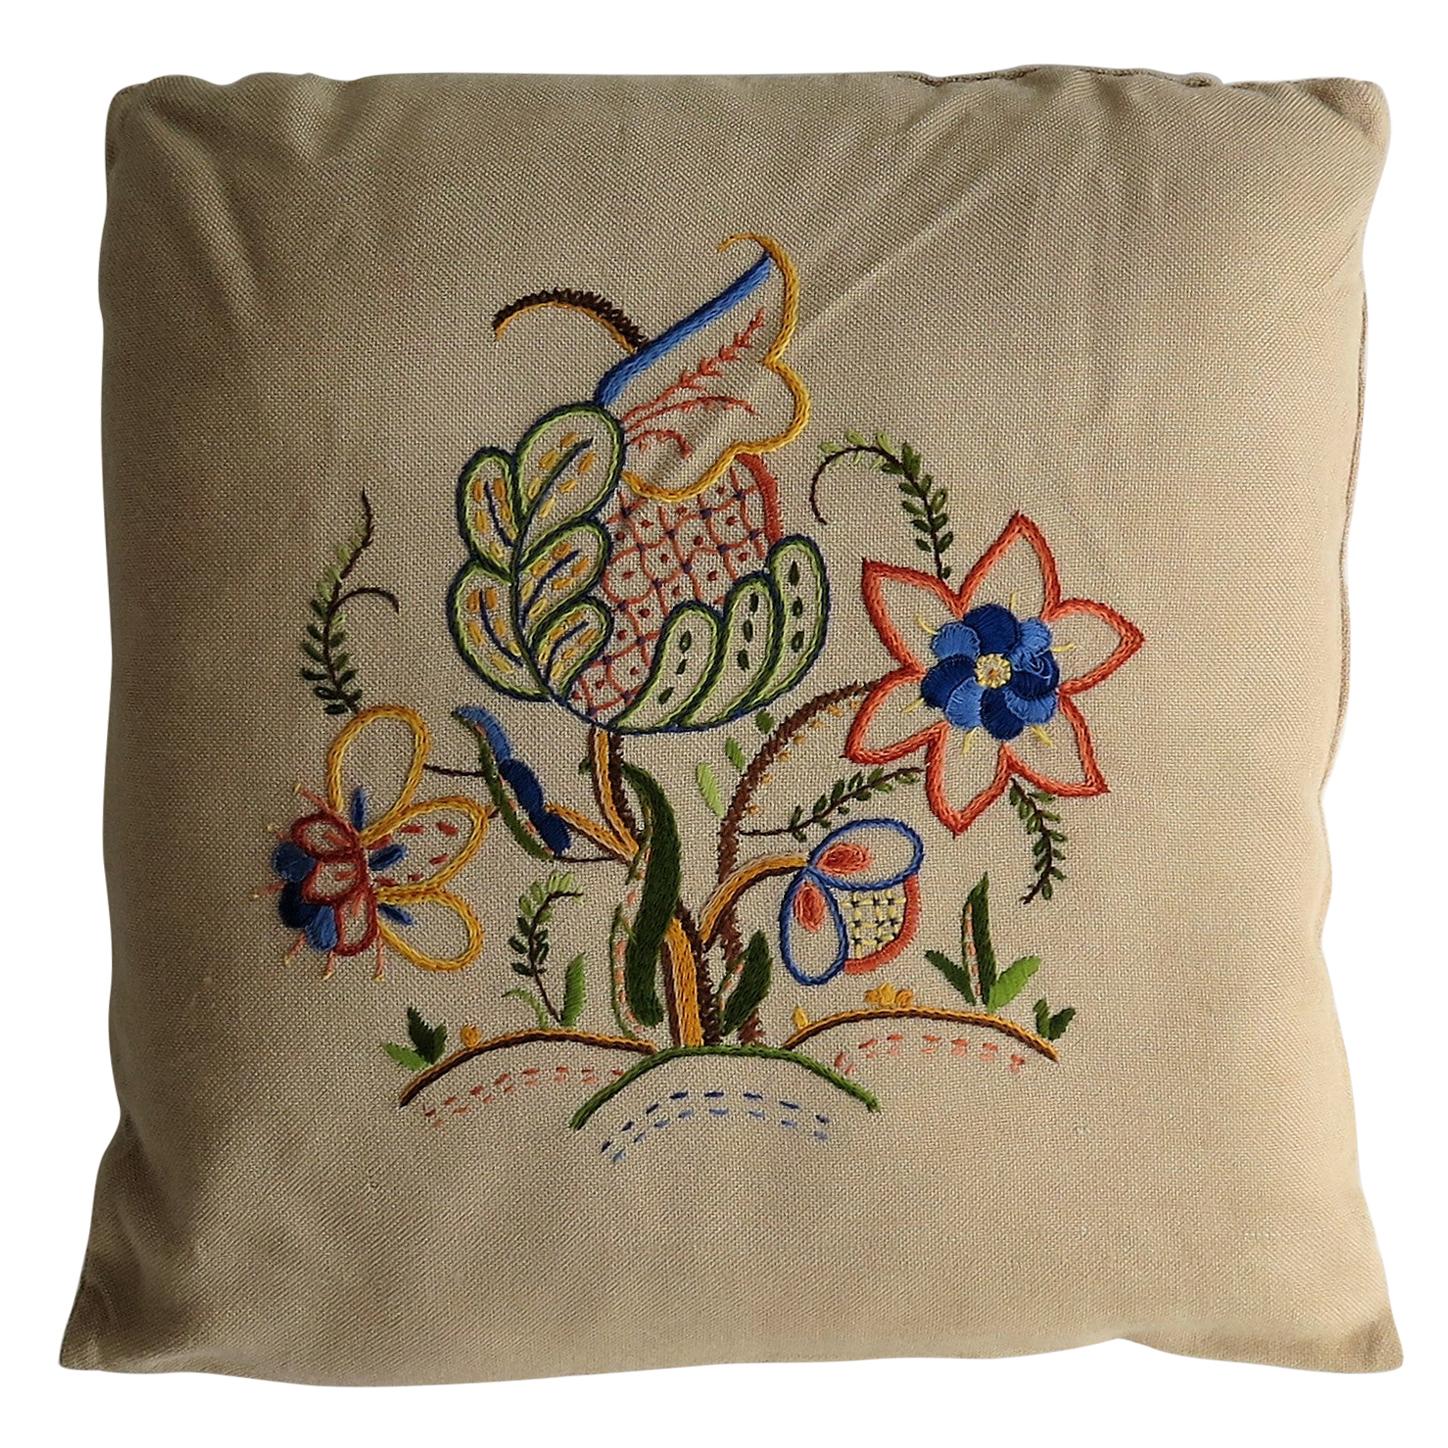 Hand Embroidered Cushion or Pillow, English circa 1940s